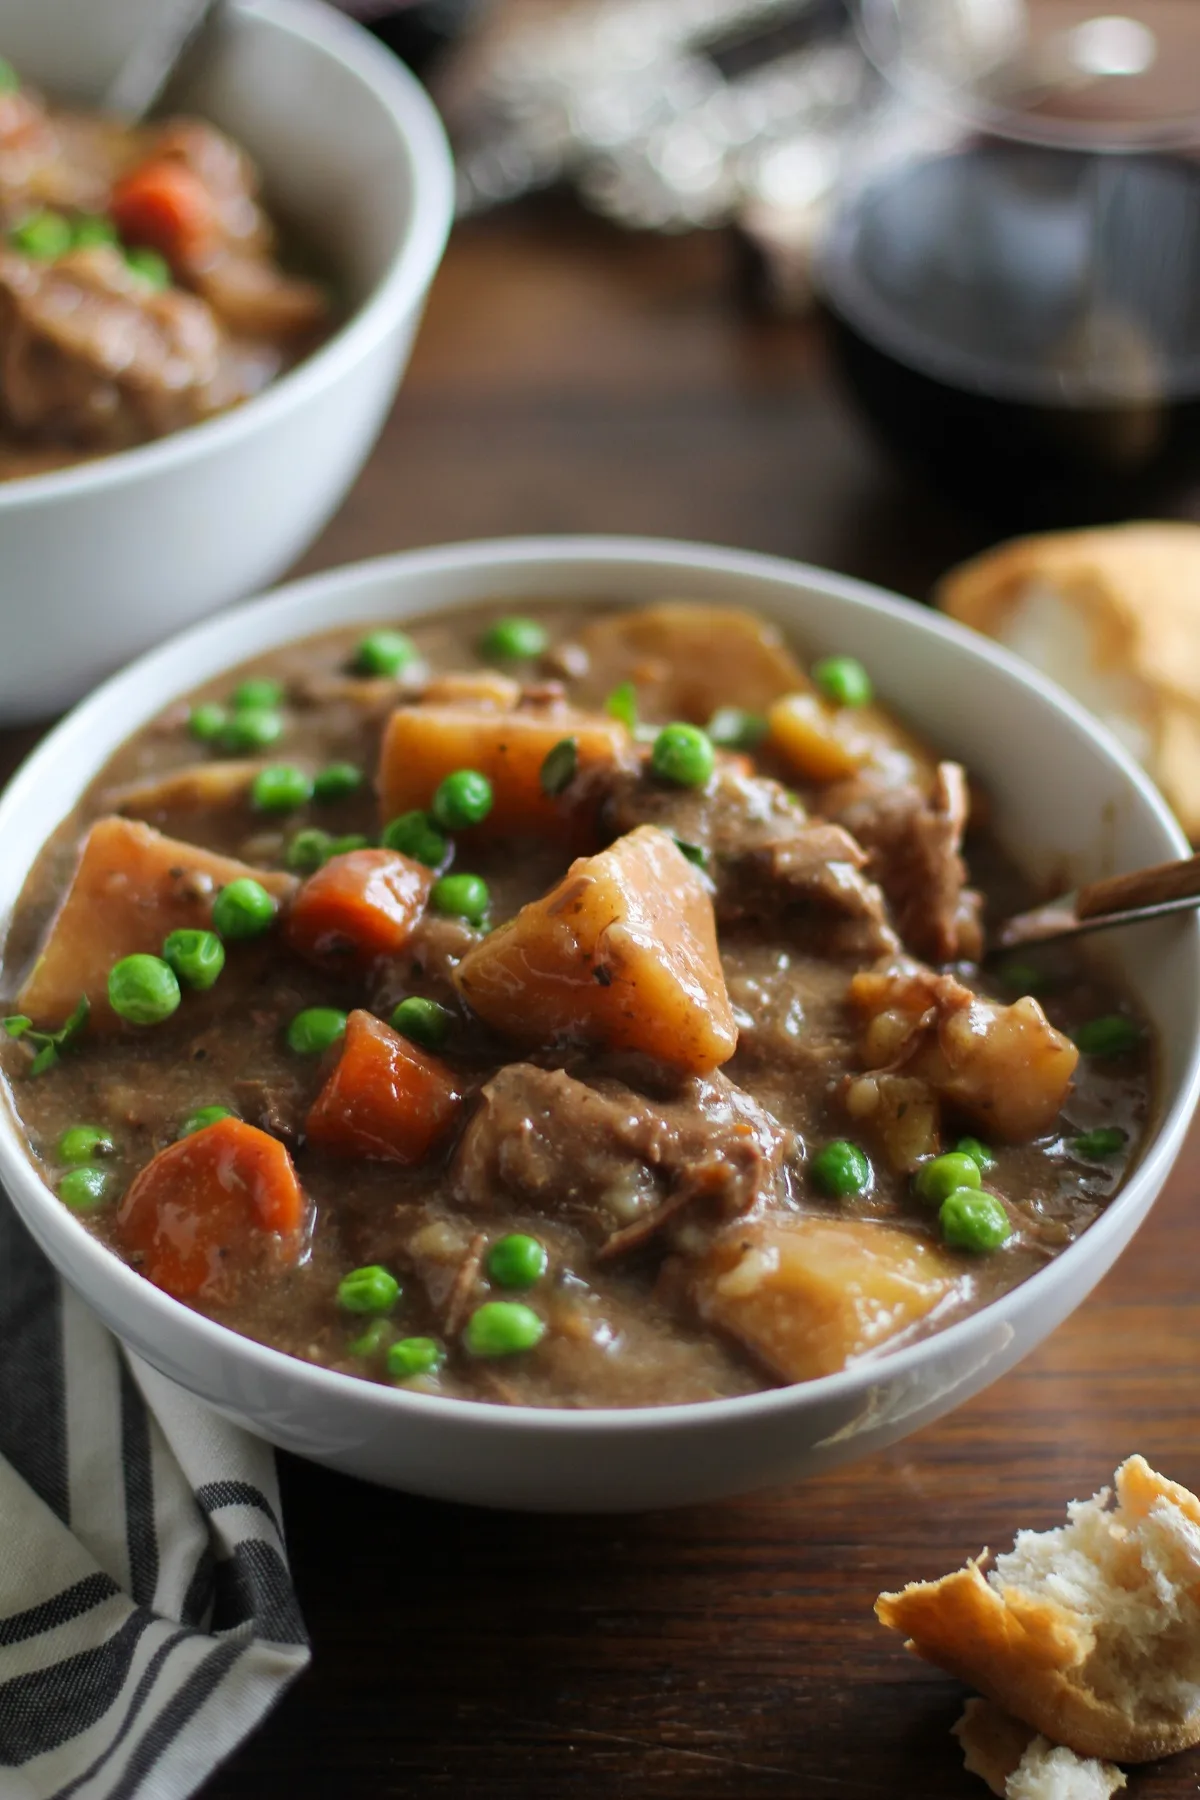 Crock Pot Beef Stew - an easy and hearty recipe made in your slow cooker | TheRoastedRoot.net #recipe #dinner #meal #glutenfree